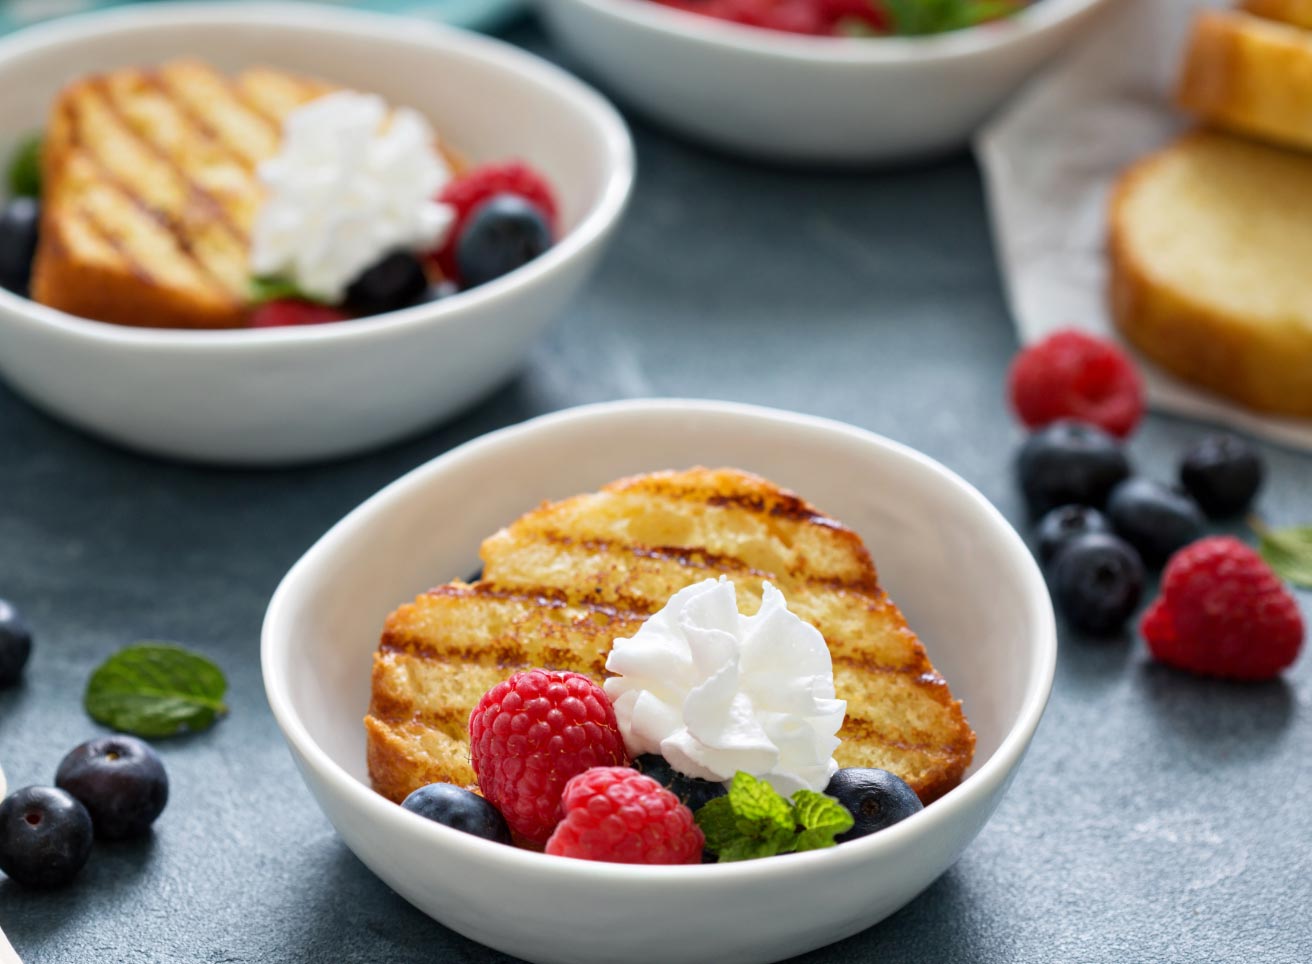 Grilled Pound Cake with Fresh Fruit